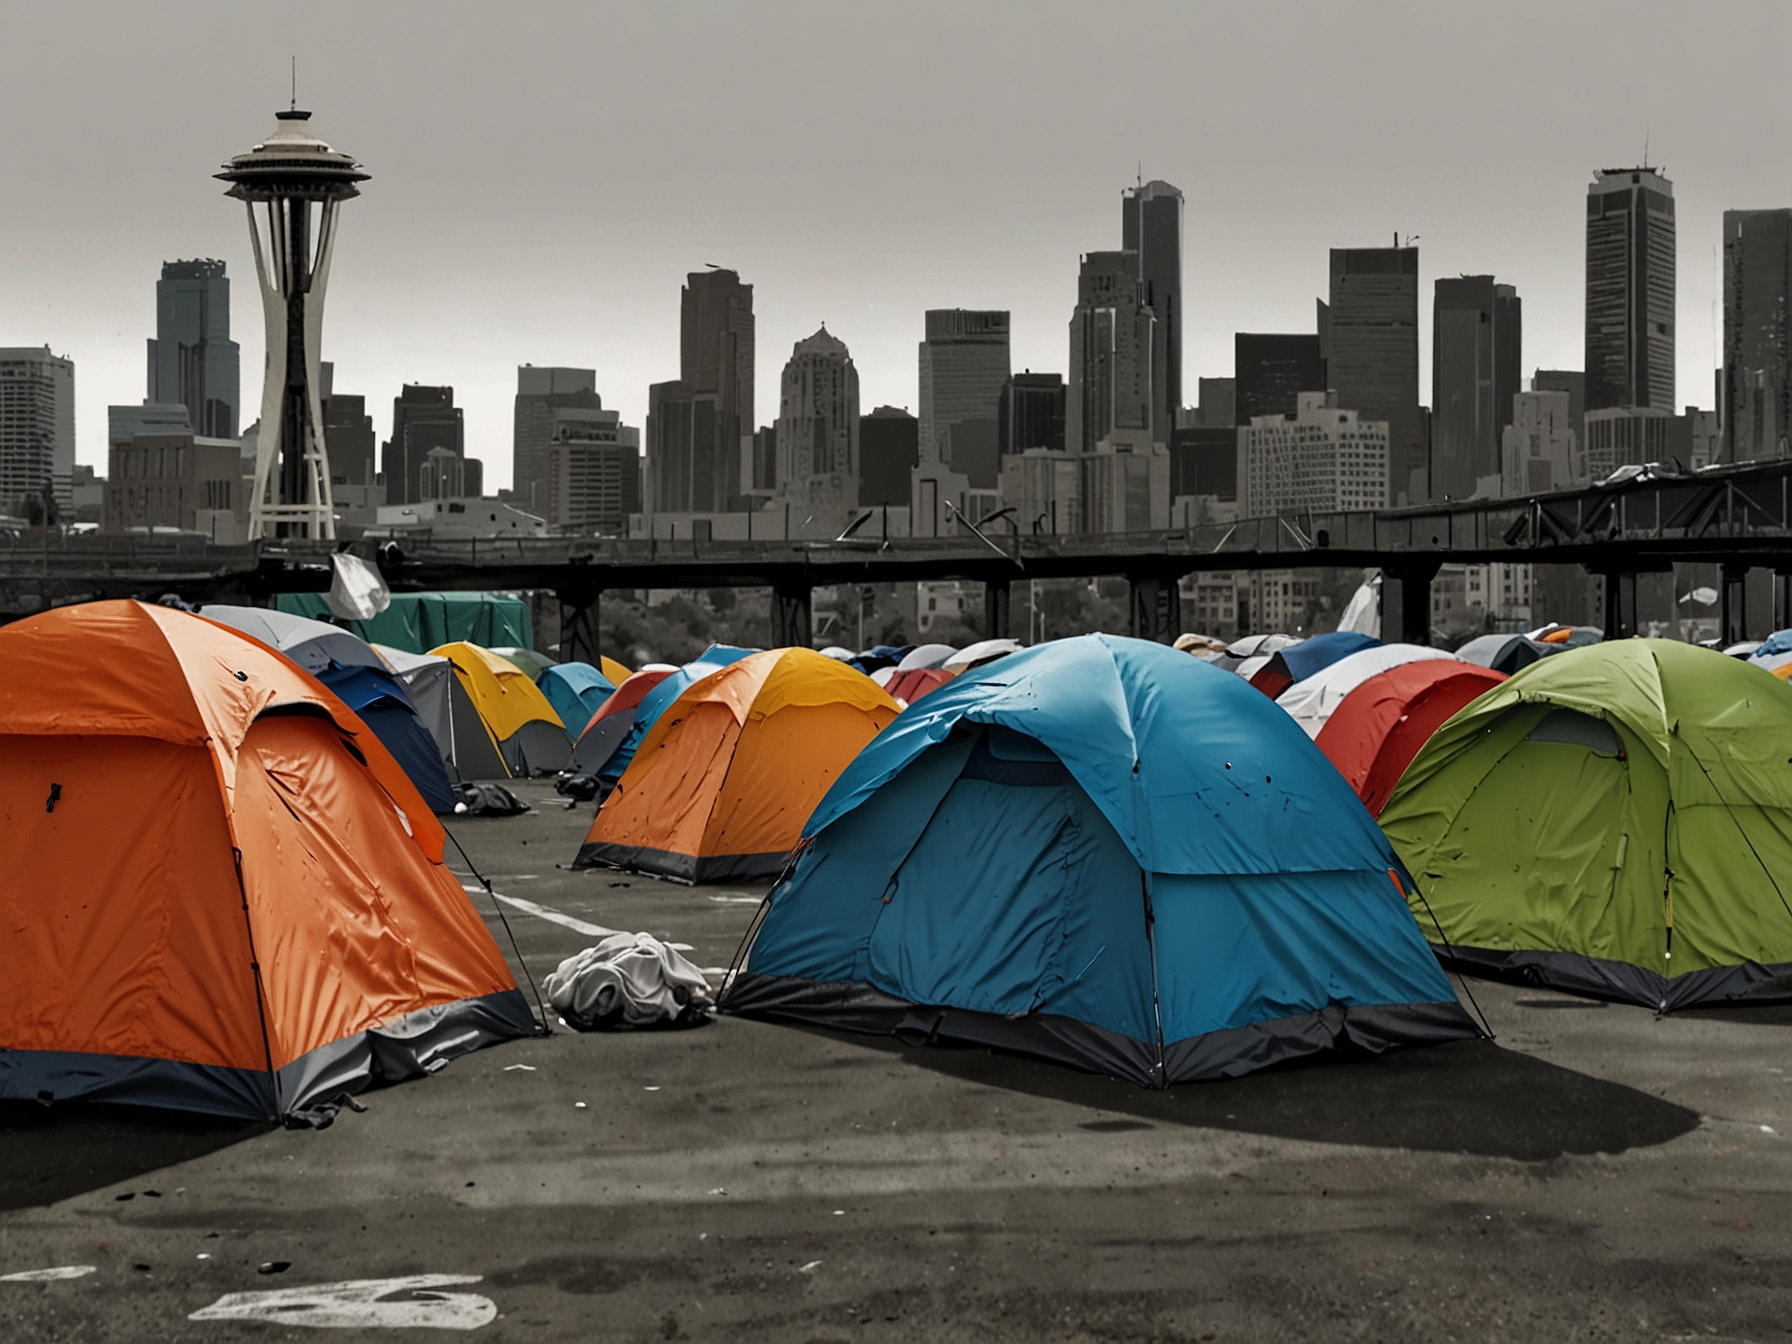 A homeless encampment in Seattle, illustrating the city's struggle with one of the highest homelessness rates in the nation and the potential impact of SCOTUS decisions on local policies.